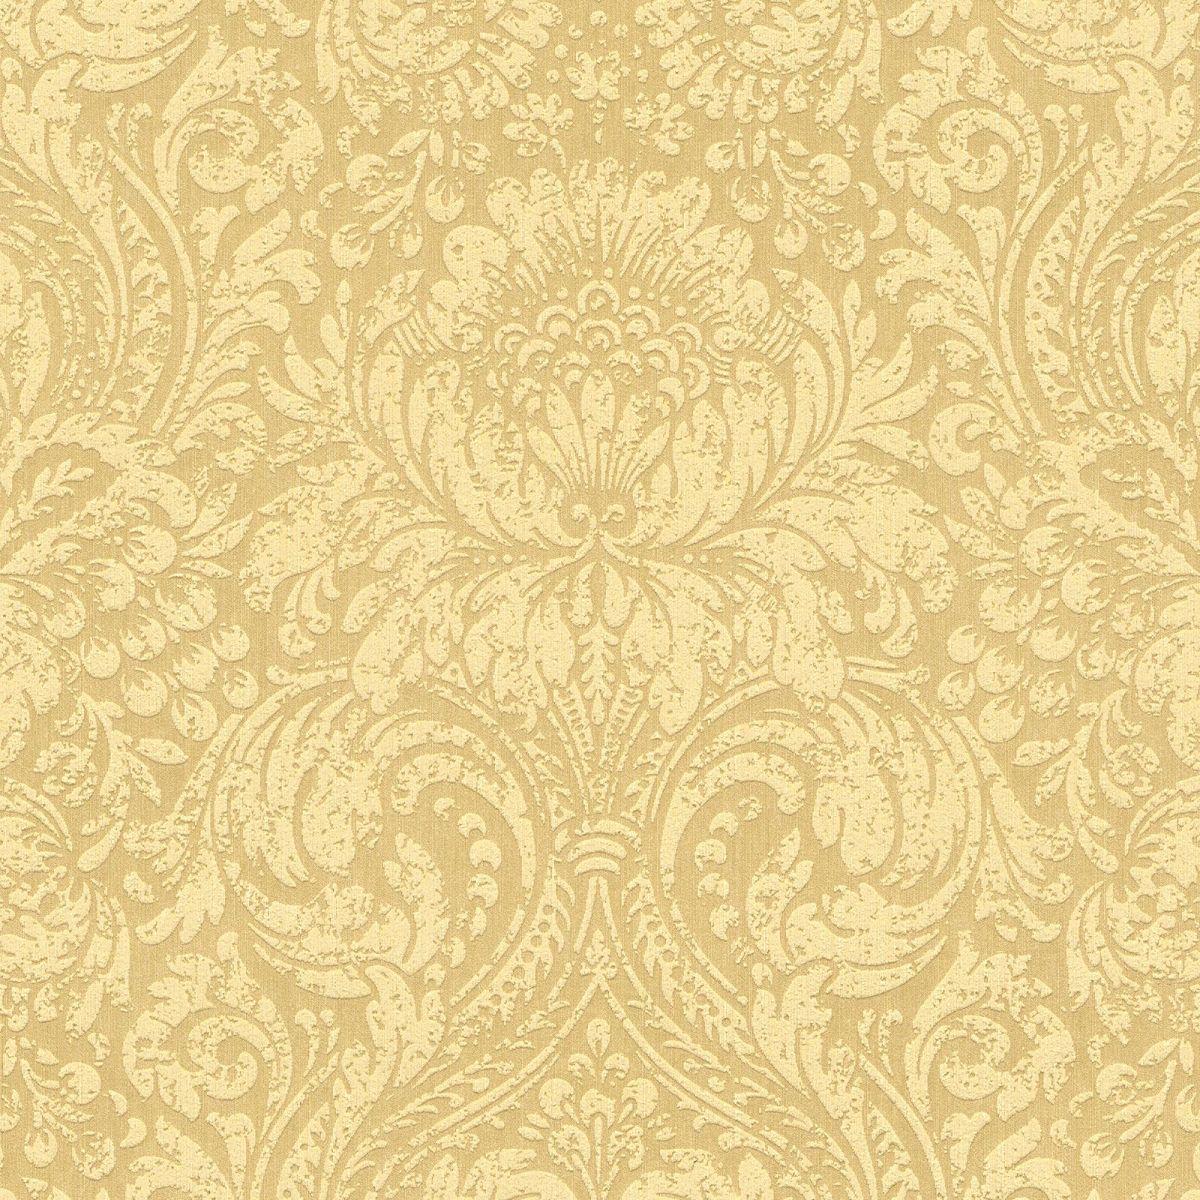 Fabric Wallpaper With Style Pattern 2668 59. Fabric Wallpaper